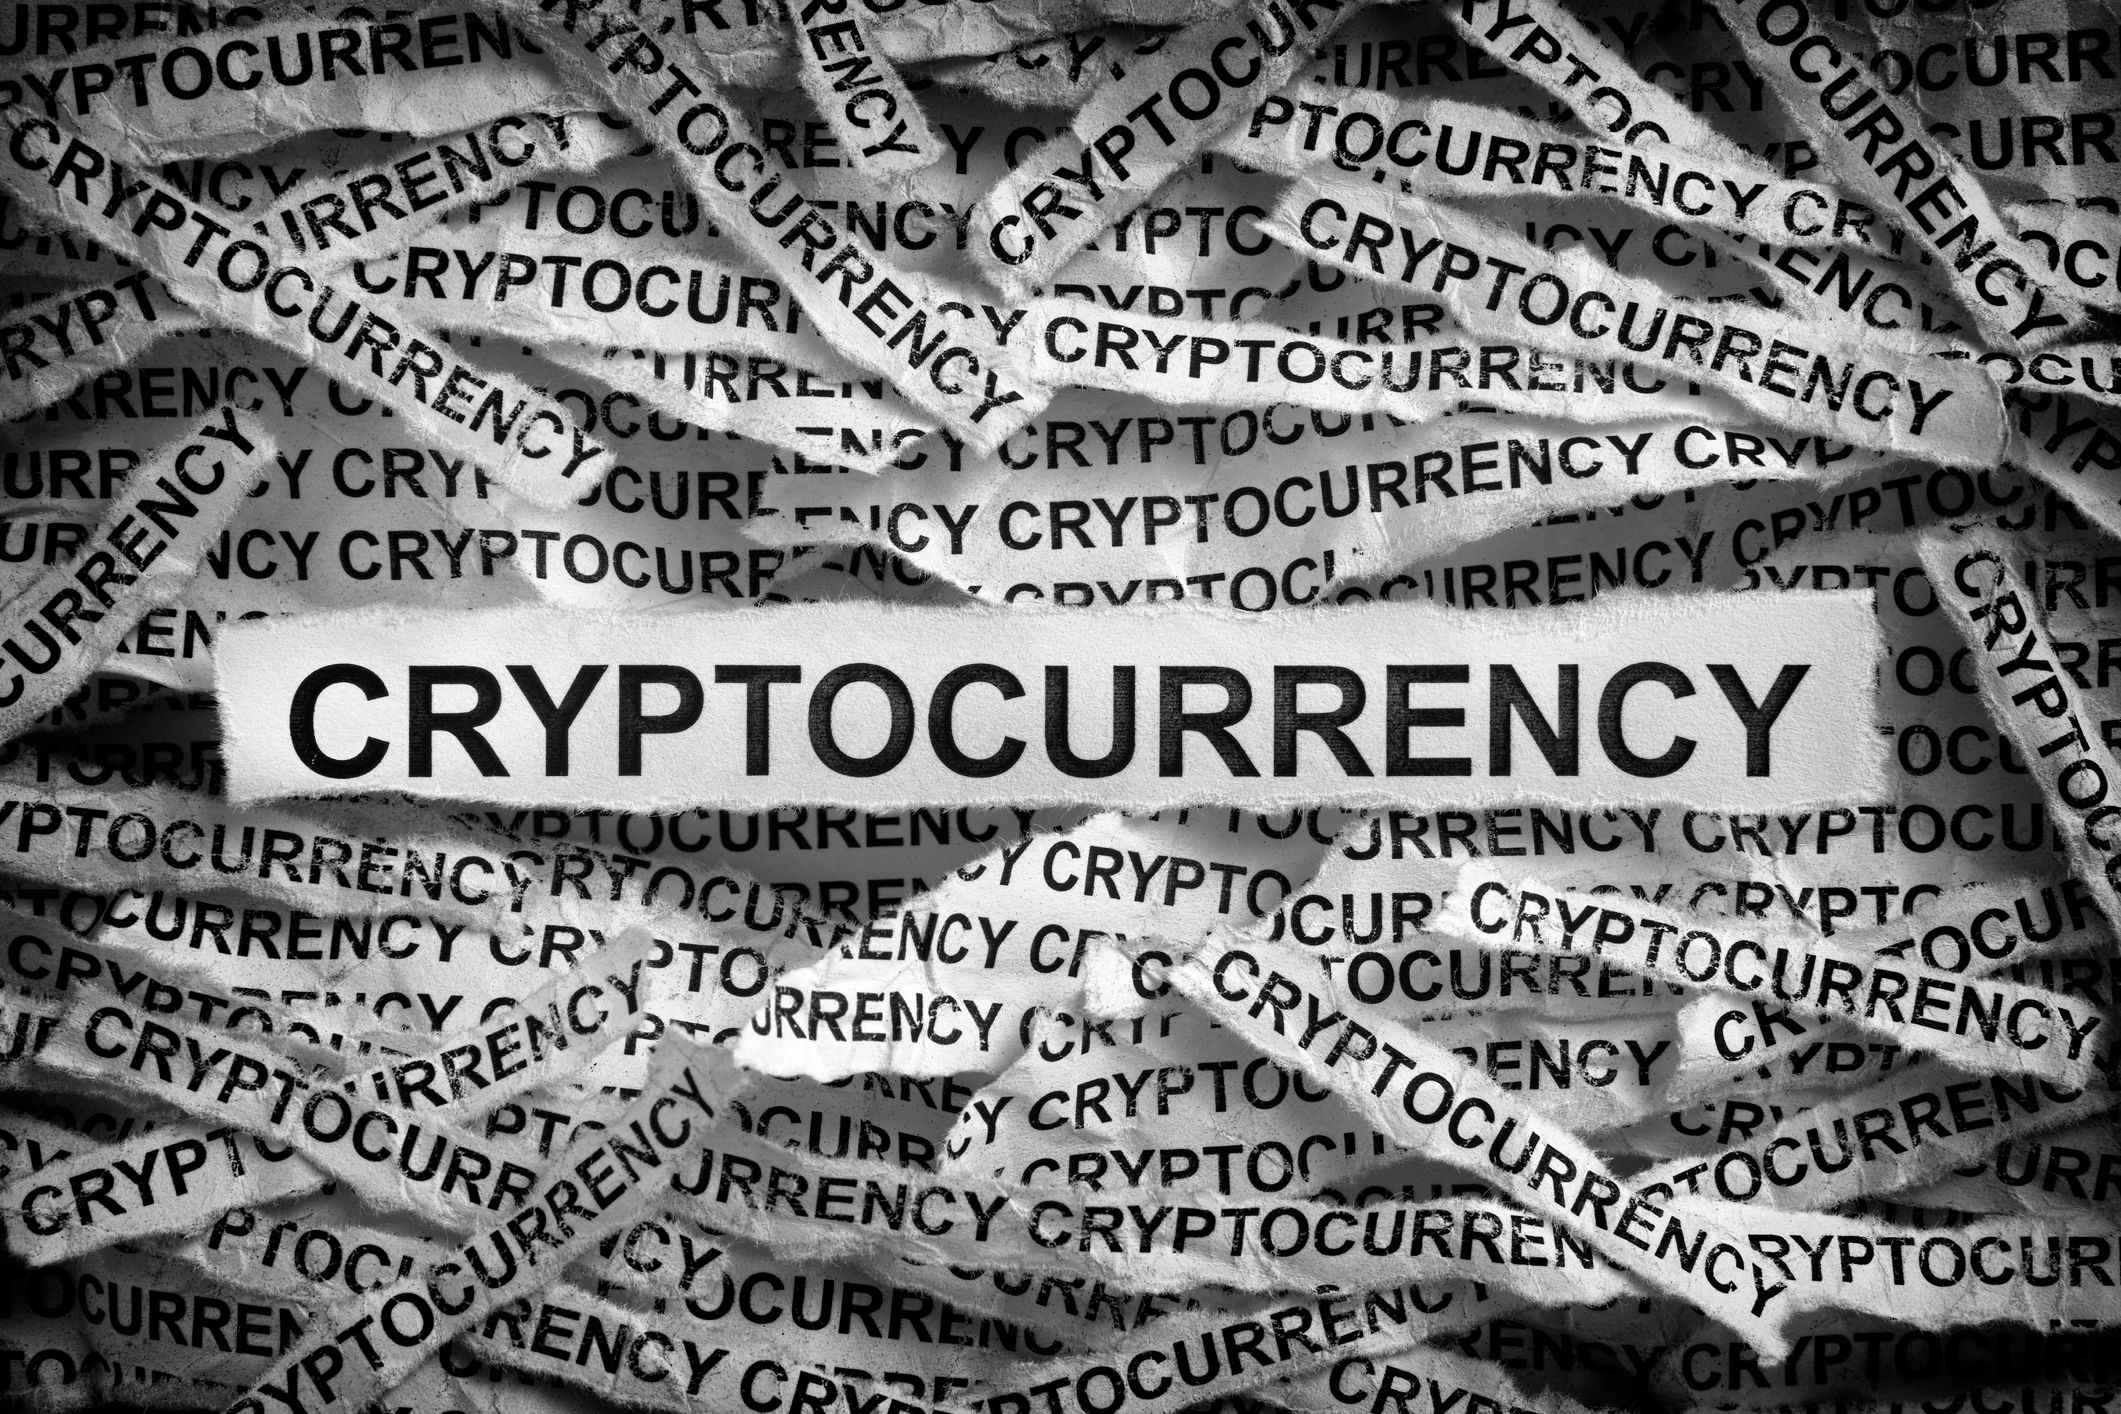 Where to Buy Cryptocurrency